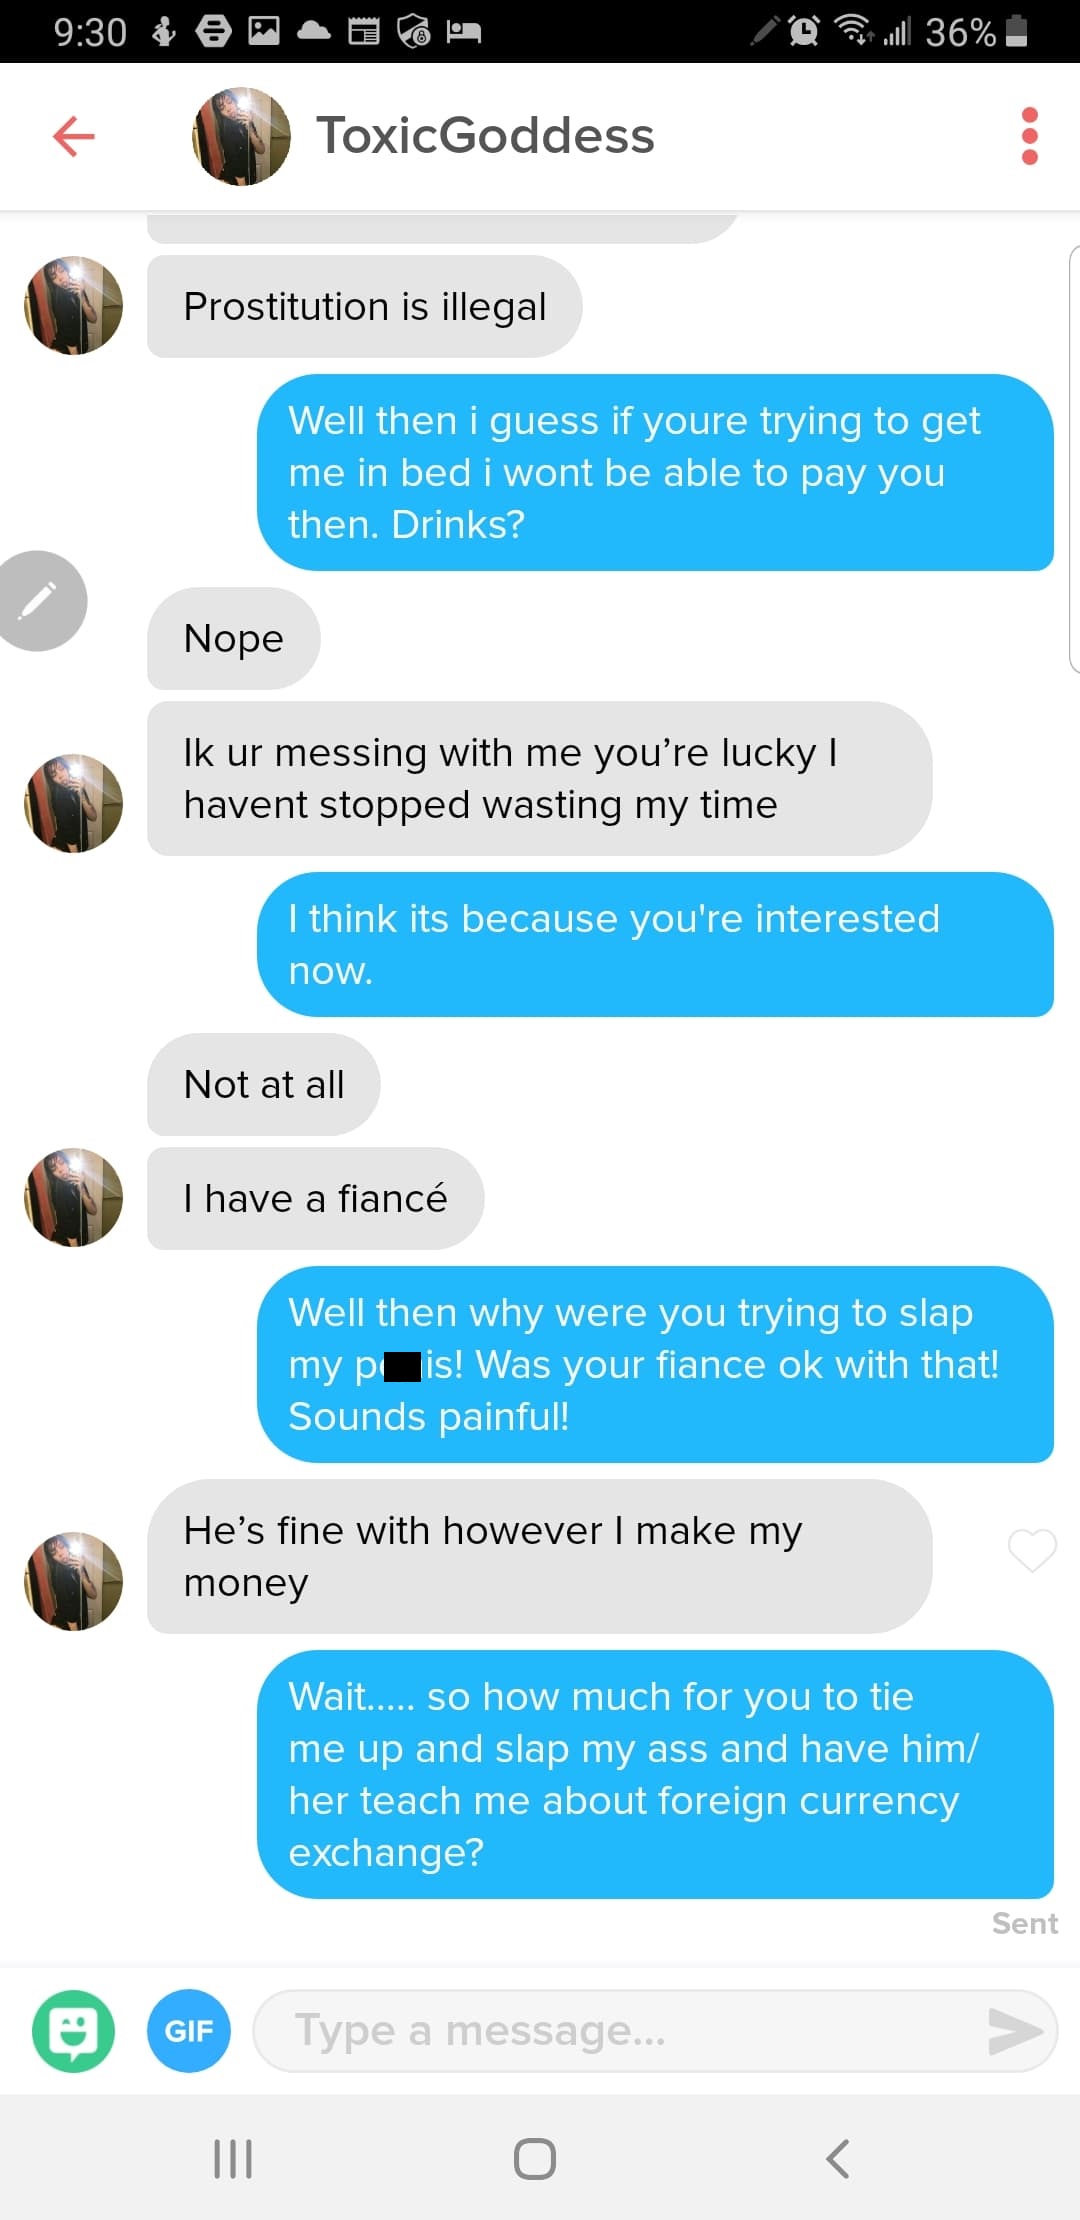 tinder gold digger - . o Del 36% ToxicGoddess Prostitution is illegal Well then i guess if youre trying to get me in bed i wont be able to pay you then. Drinks? Nope Ik ur messing with me you're lucky | havent stopped wasting my time I think its because y